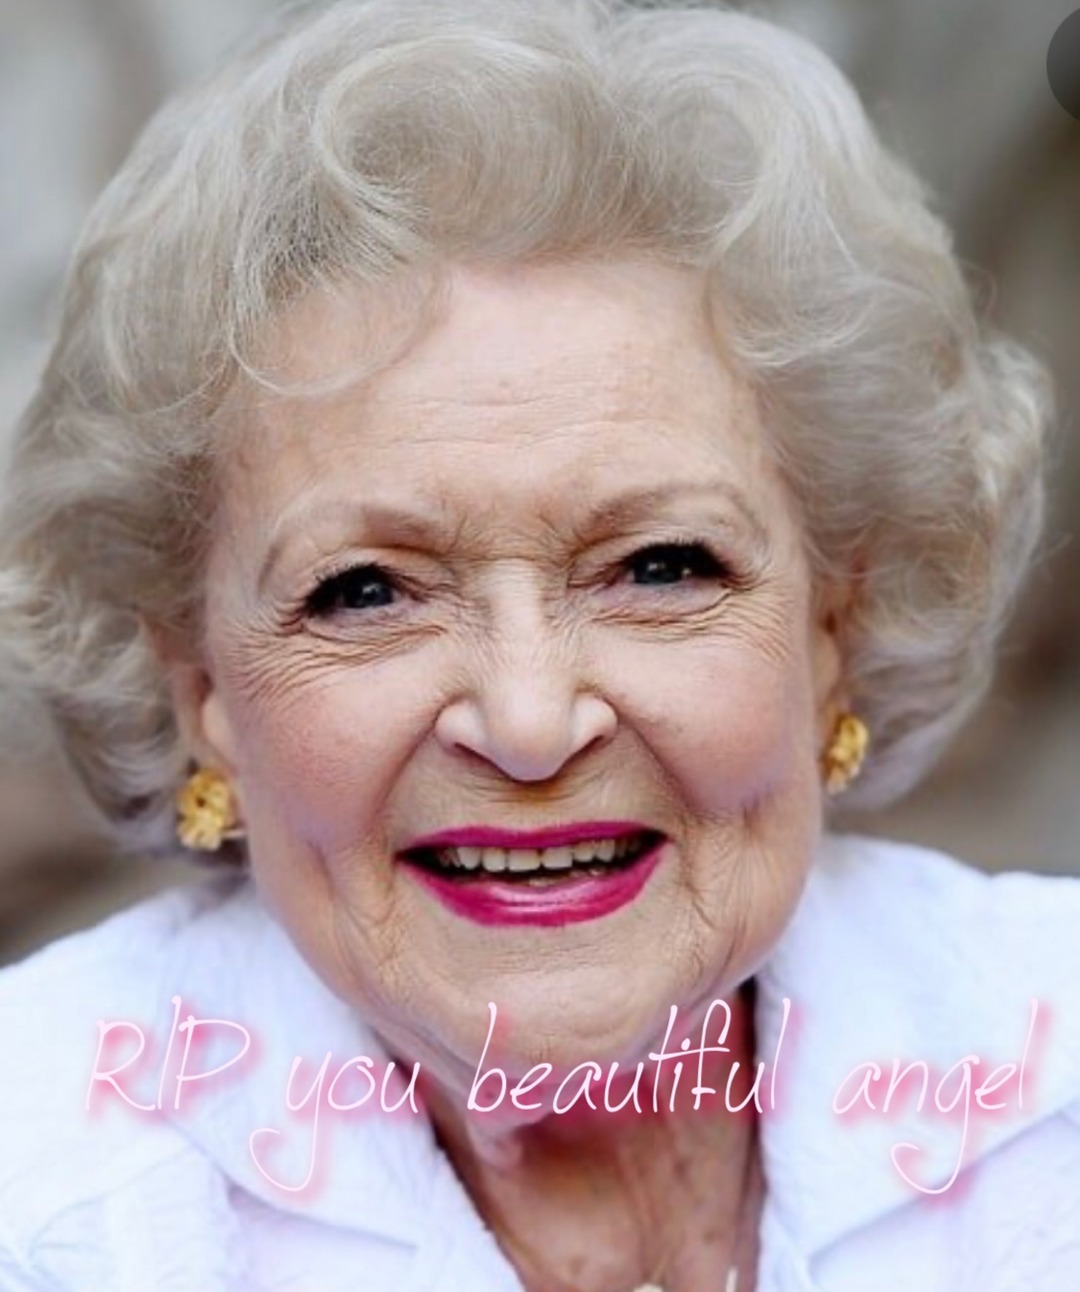 Not a meme, but she will be missed like no other.